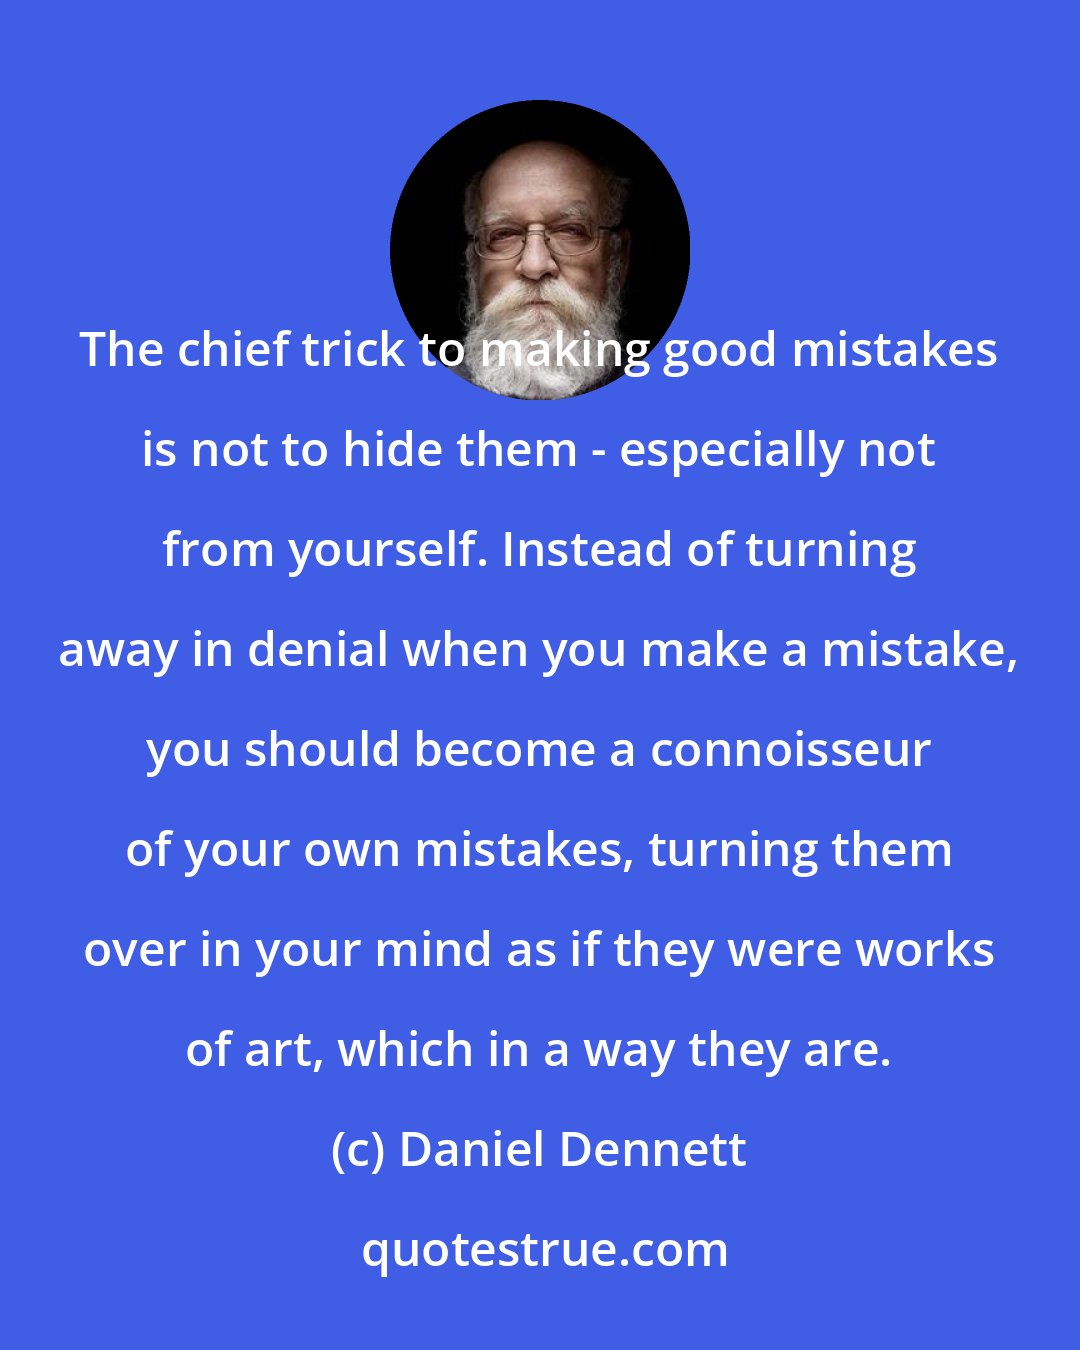 Daniel Dennett: The chief trick to making good mistakes is not to hide them - especially not from yourself. Instead of turning away in denial when you make a mistake, you should become a connoisseur of your own mistakes, turning them over in your mind as if they were works of art, which in a way they are.